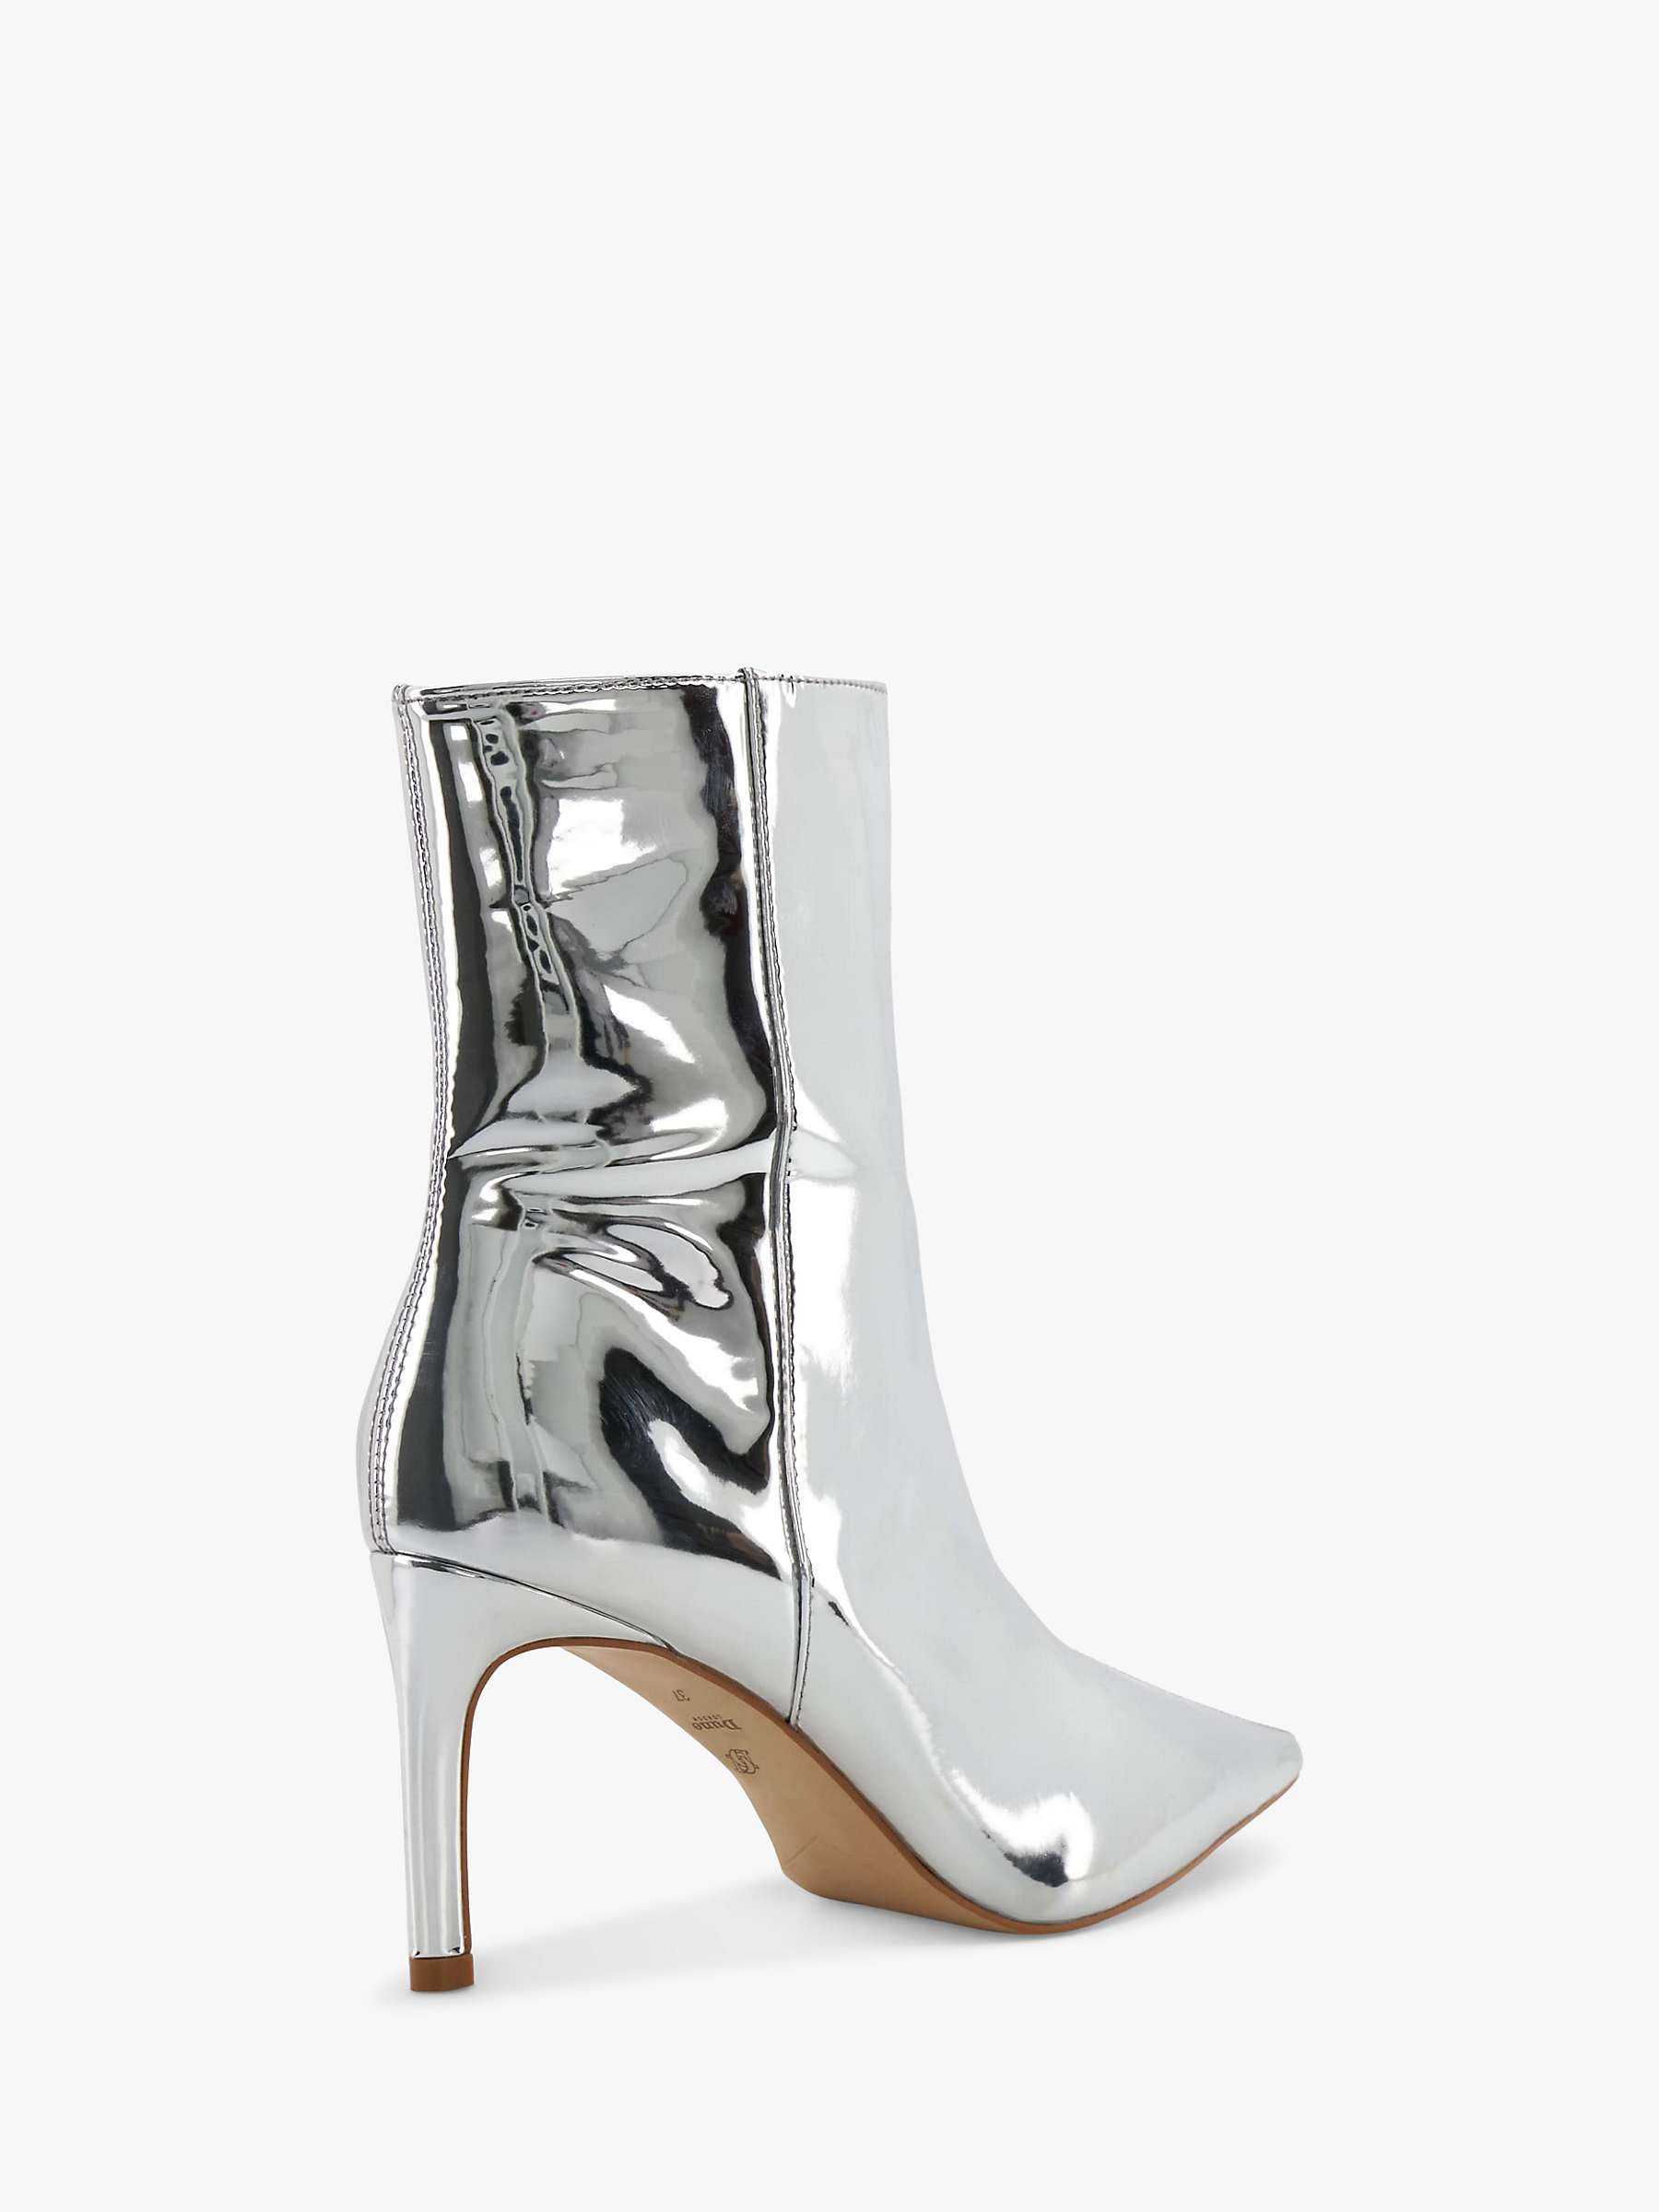 Buy Dune Olexi Pointed Stiletto Boots, Silver Online at johnlewis.com